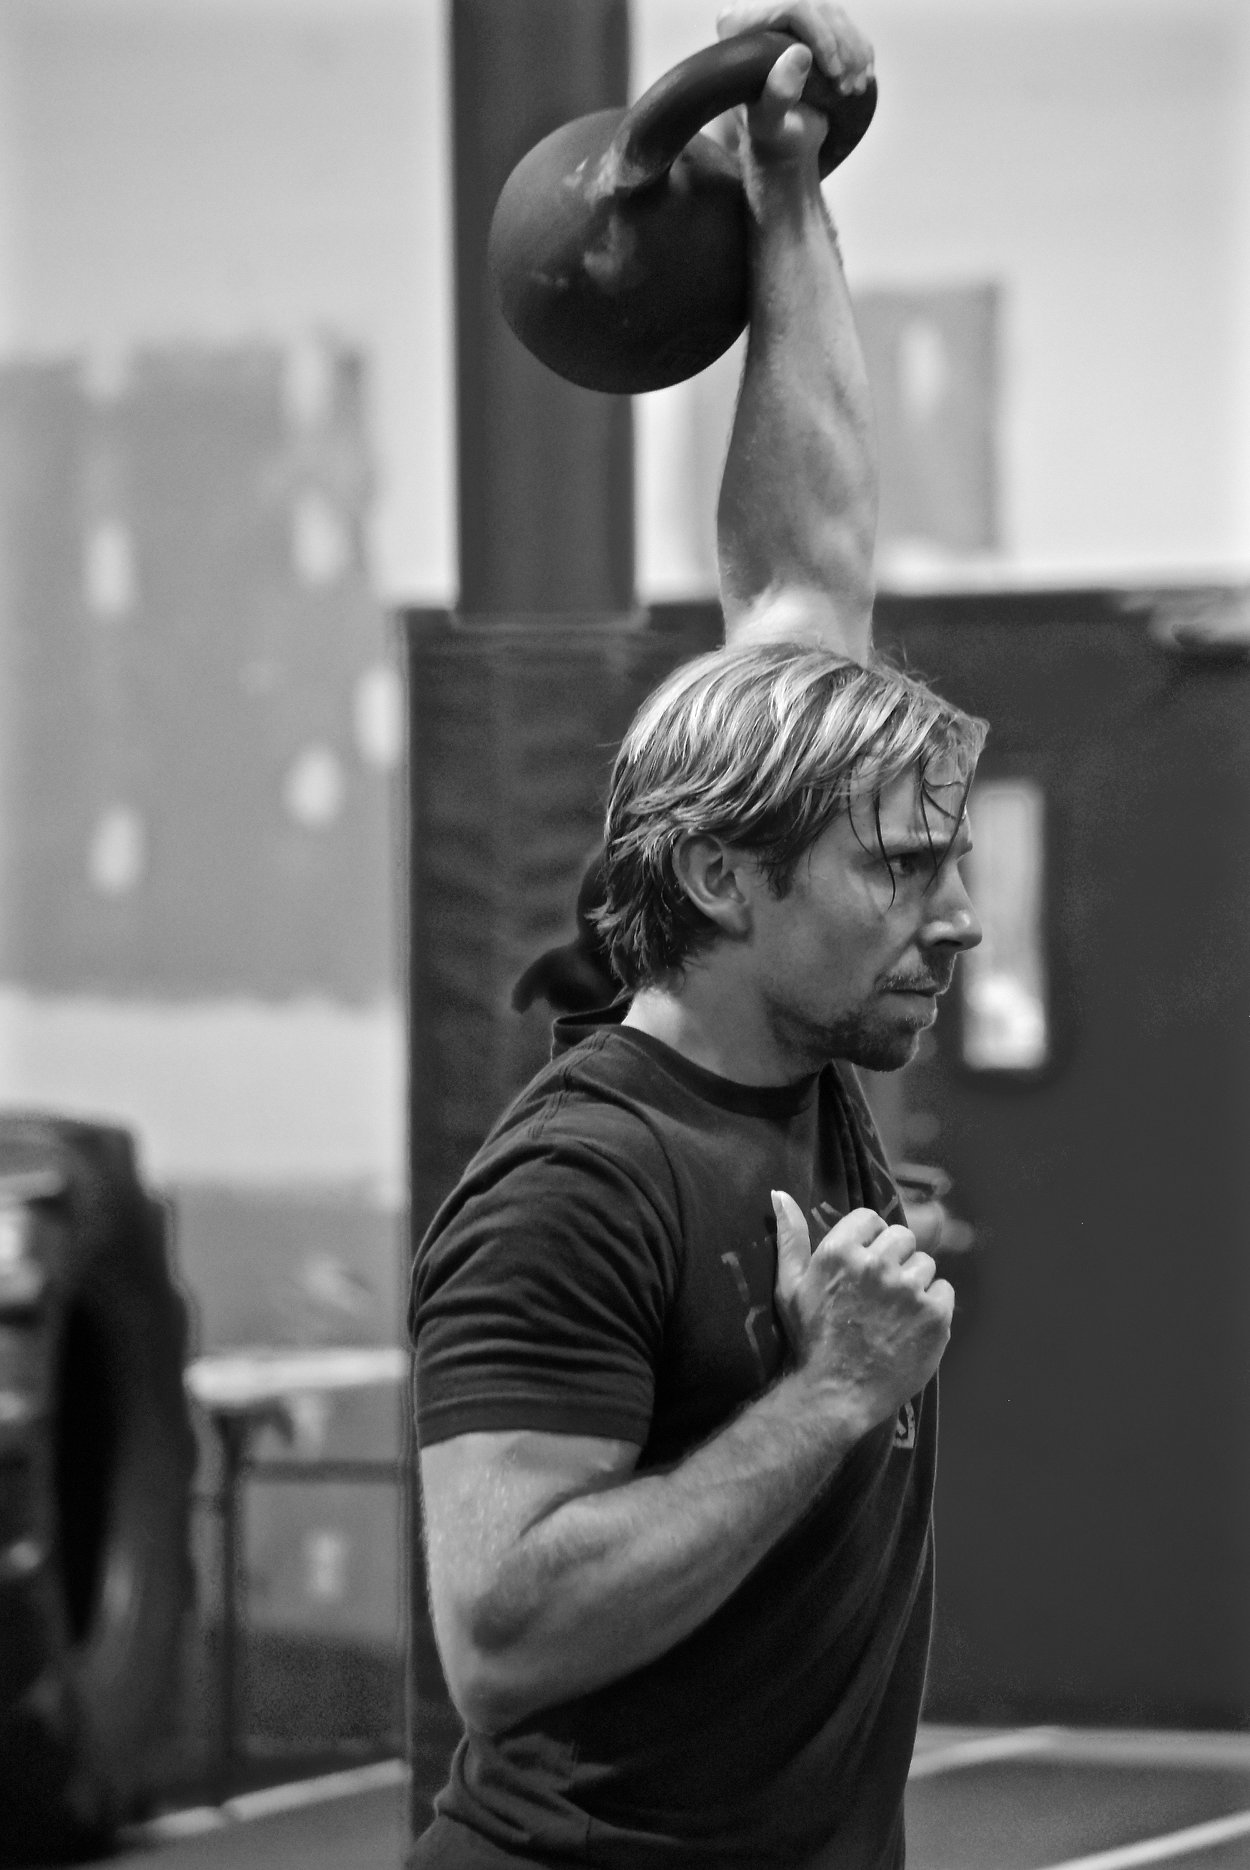 How To Kettlebell Snatch: The Complete Guide